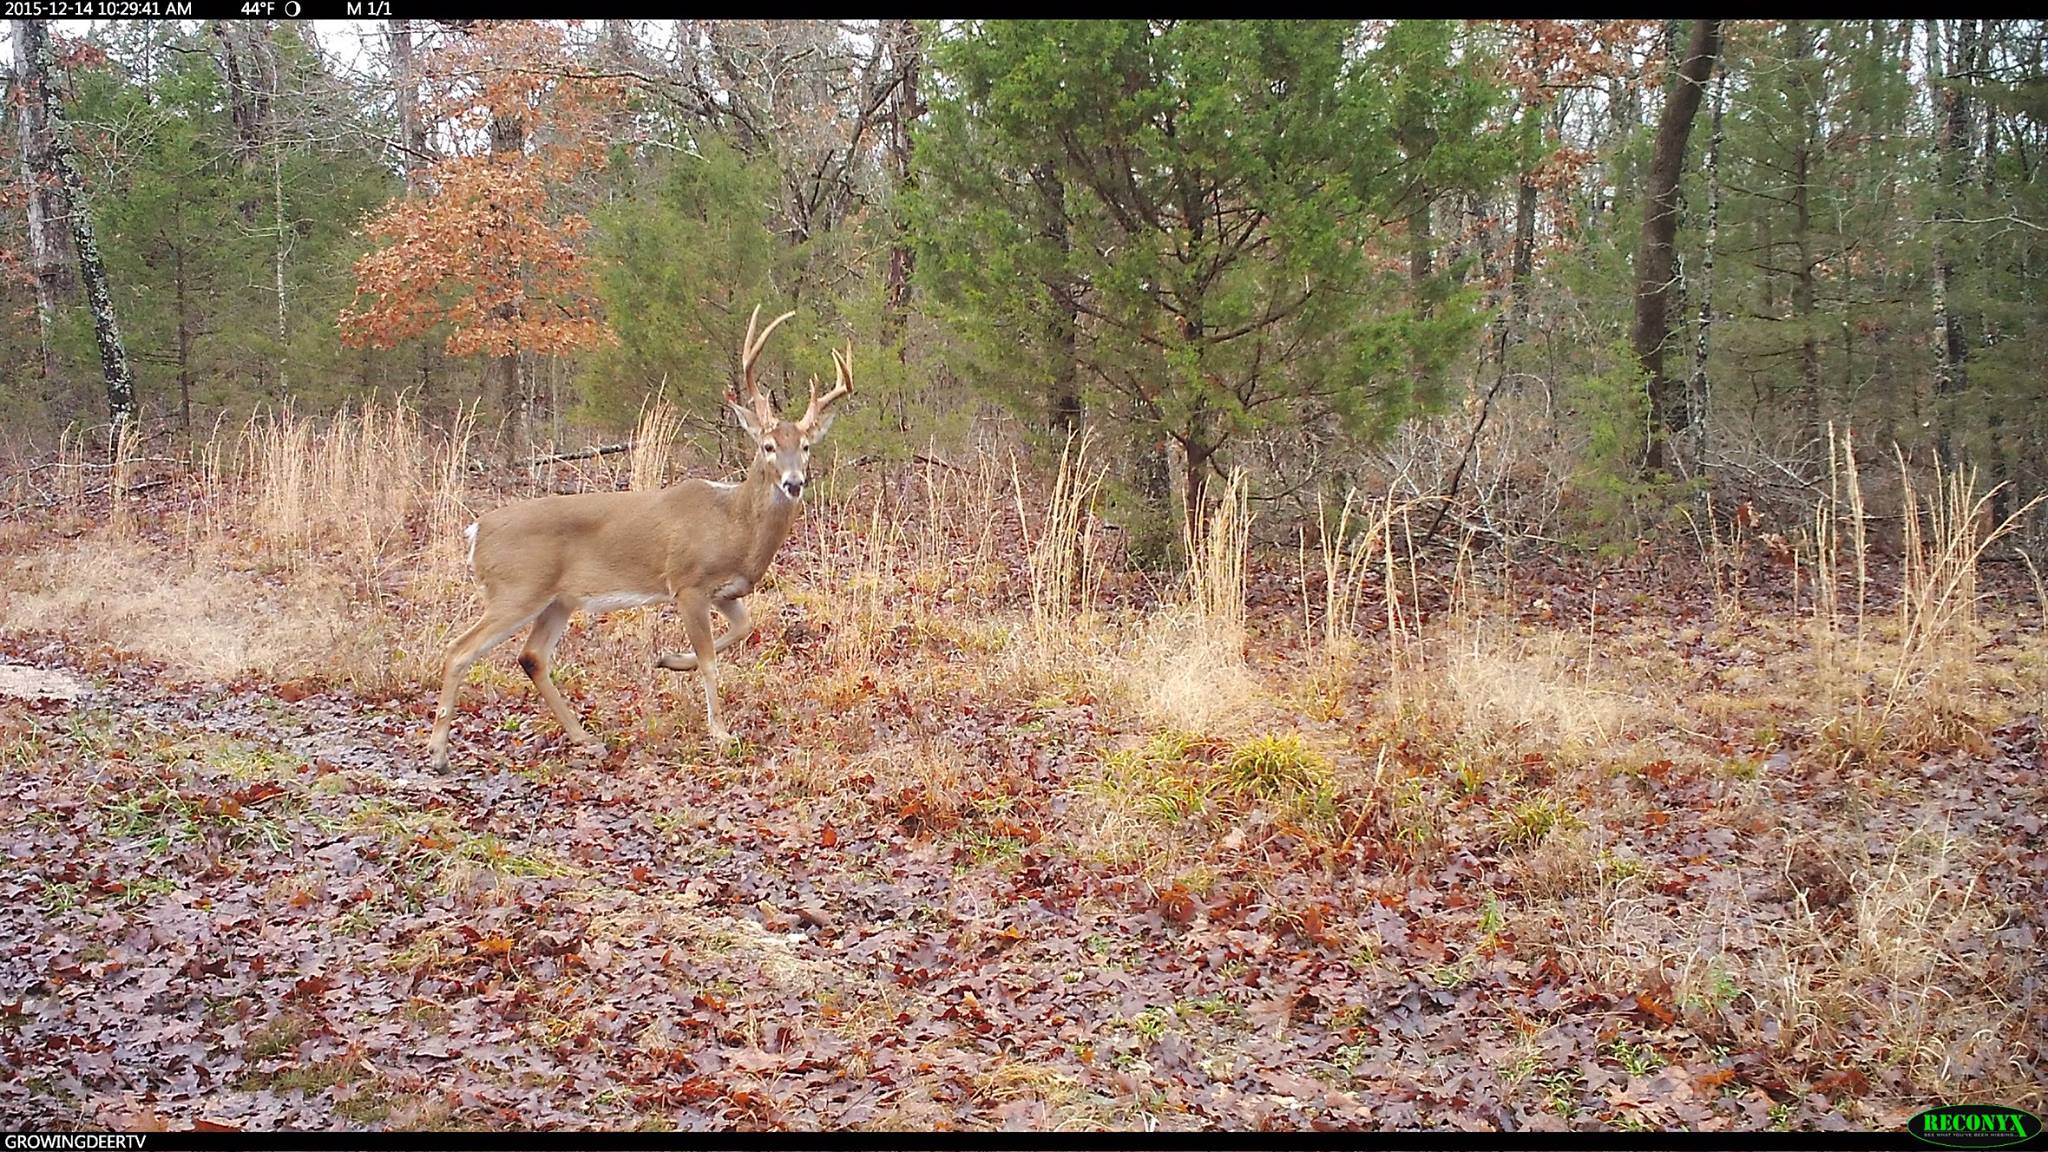 We are watching and learning this buck's movements.